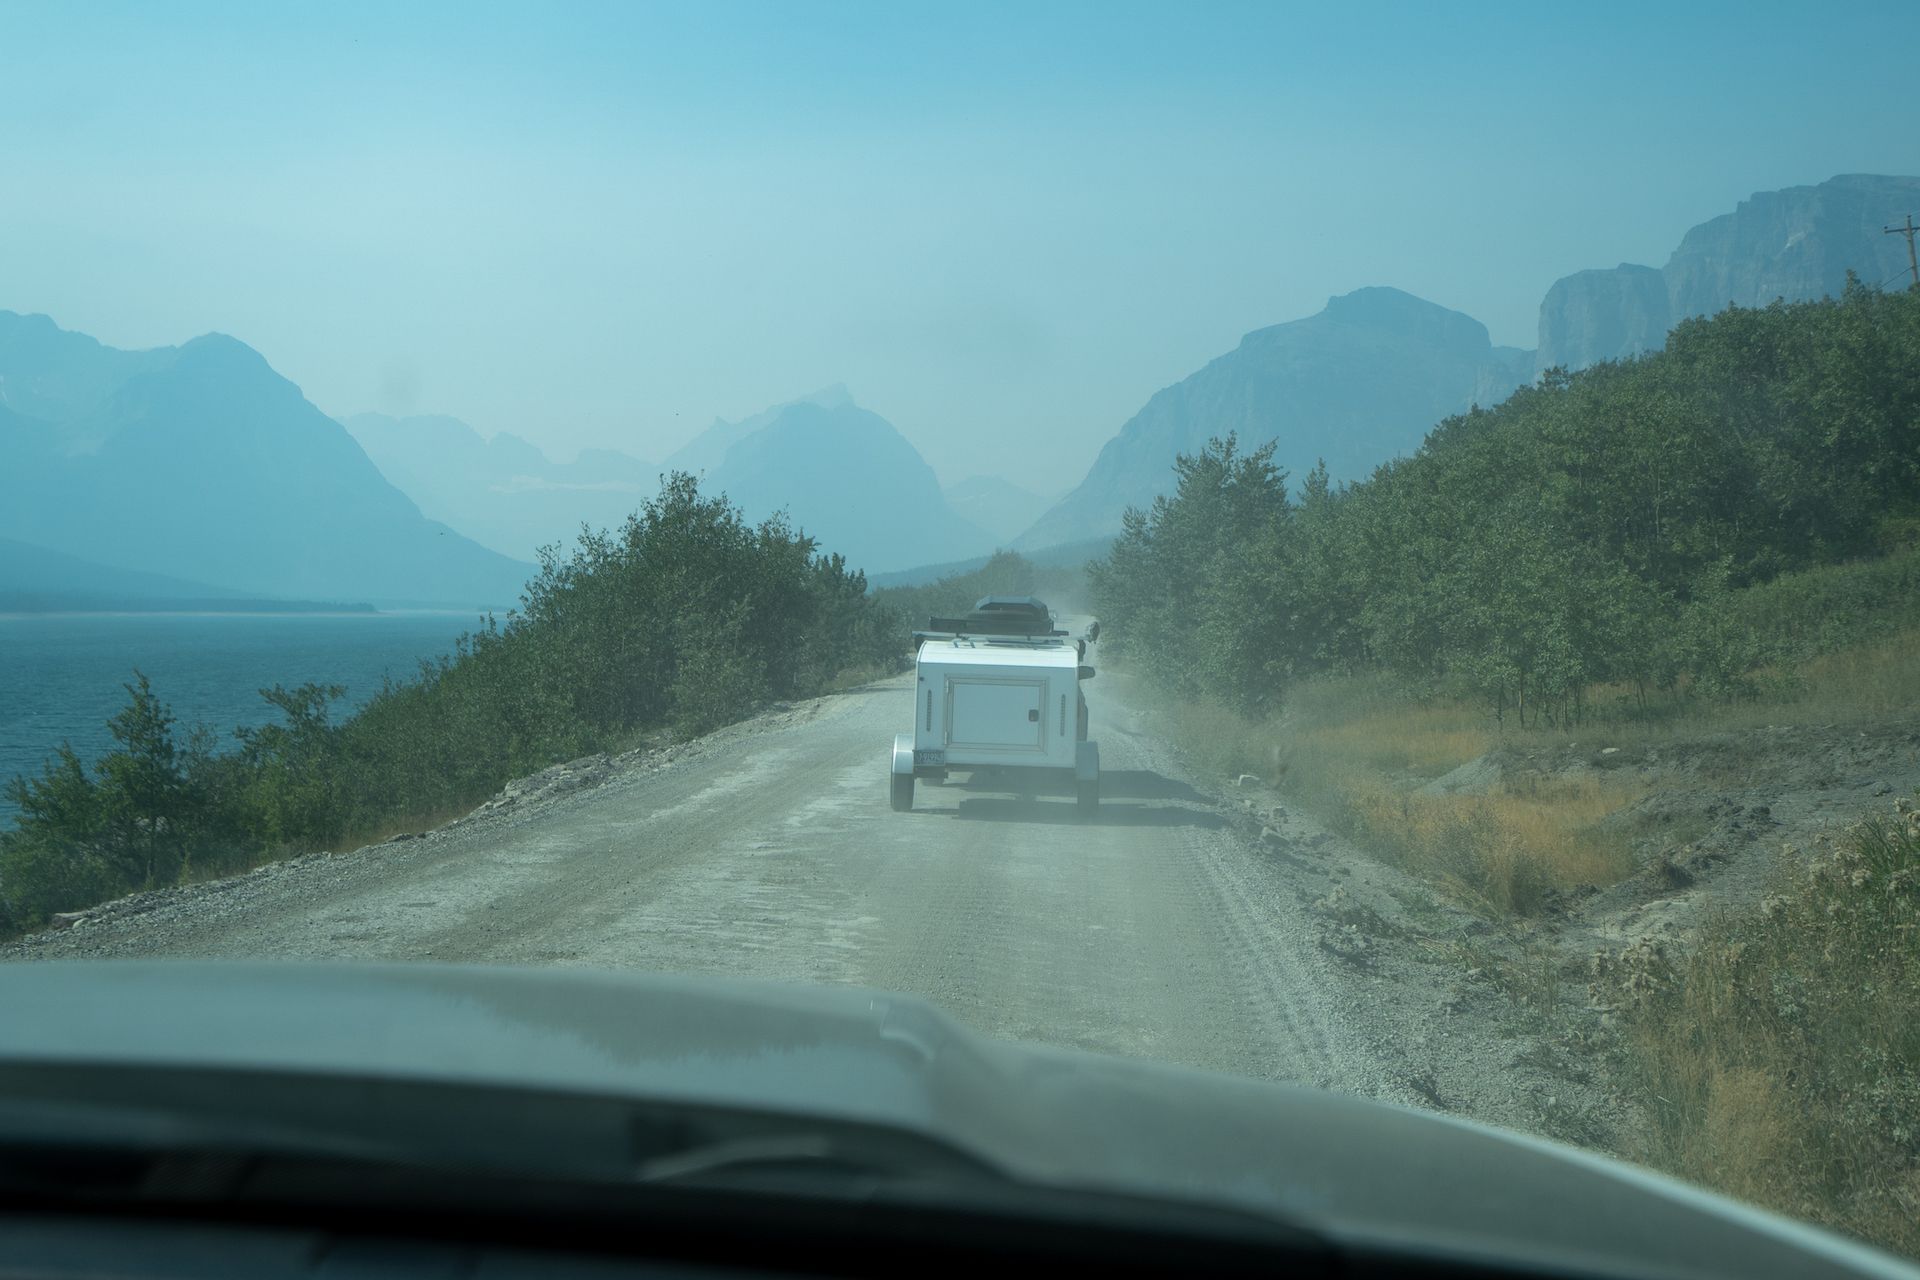 We followed Will and Amelia’s to the Many Glacier Campground. The smoke was pretty intense and we could barely see the mountains on Saturday.